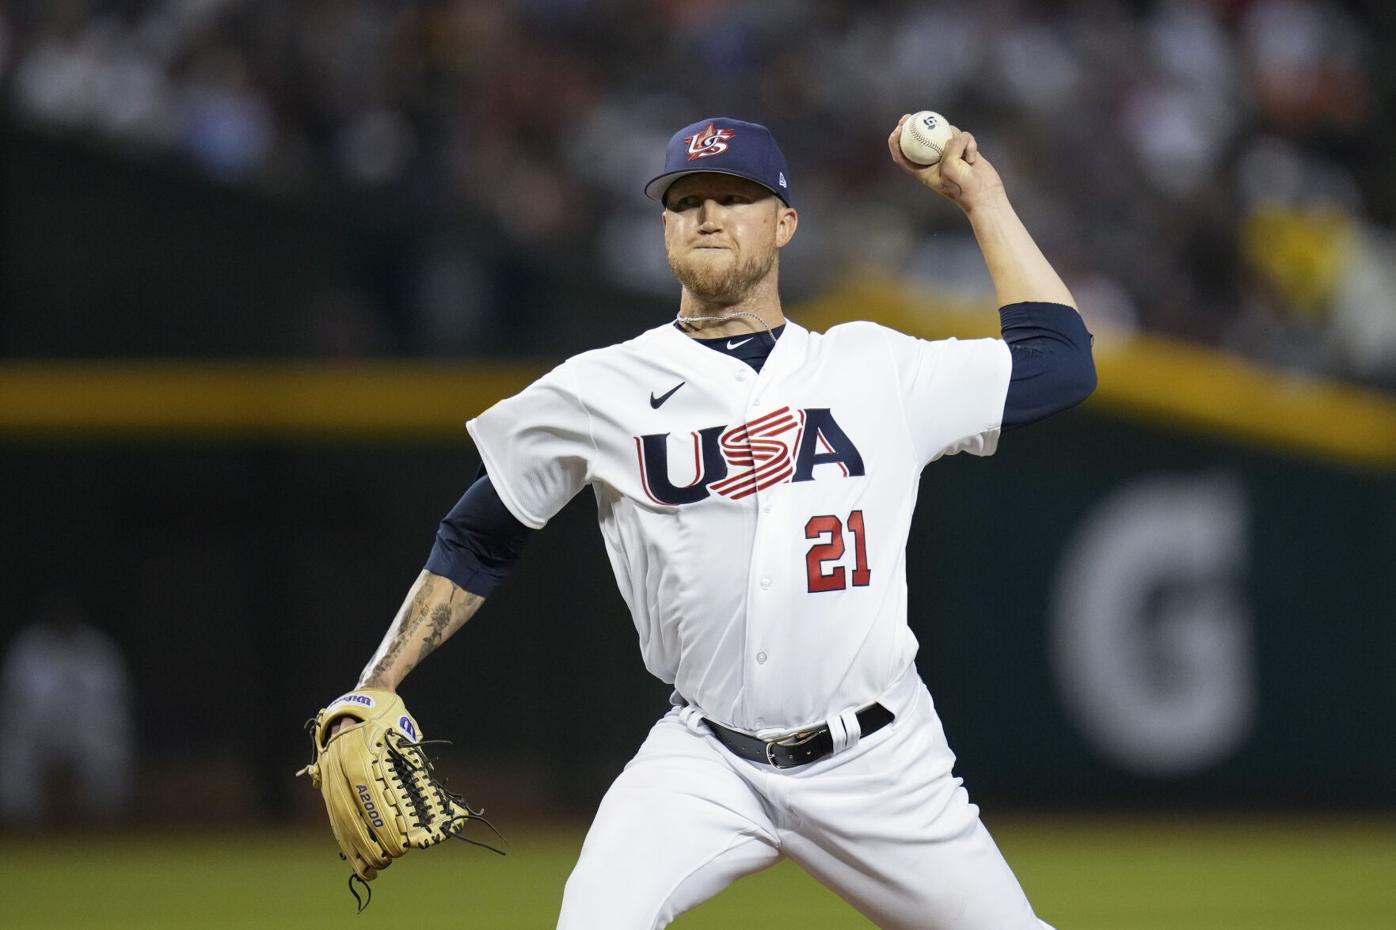 World Baseball Classic: Great Britain pitcher loses 'T' on jersey